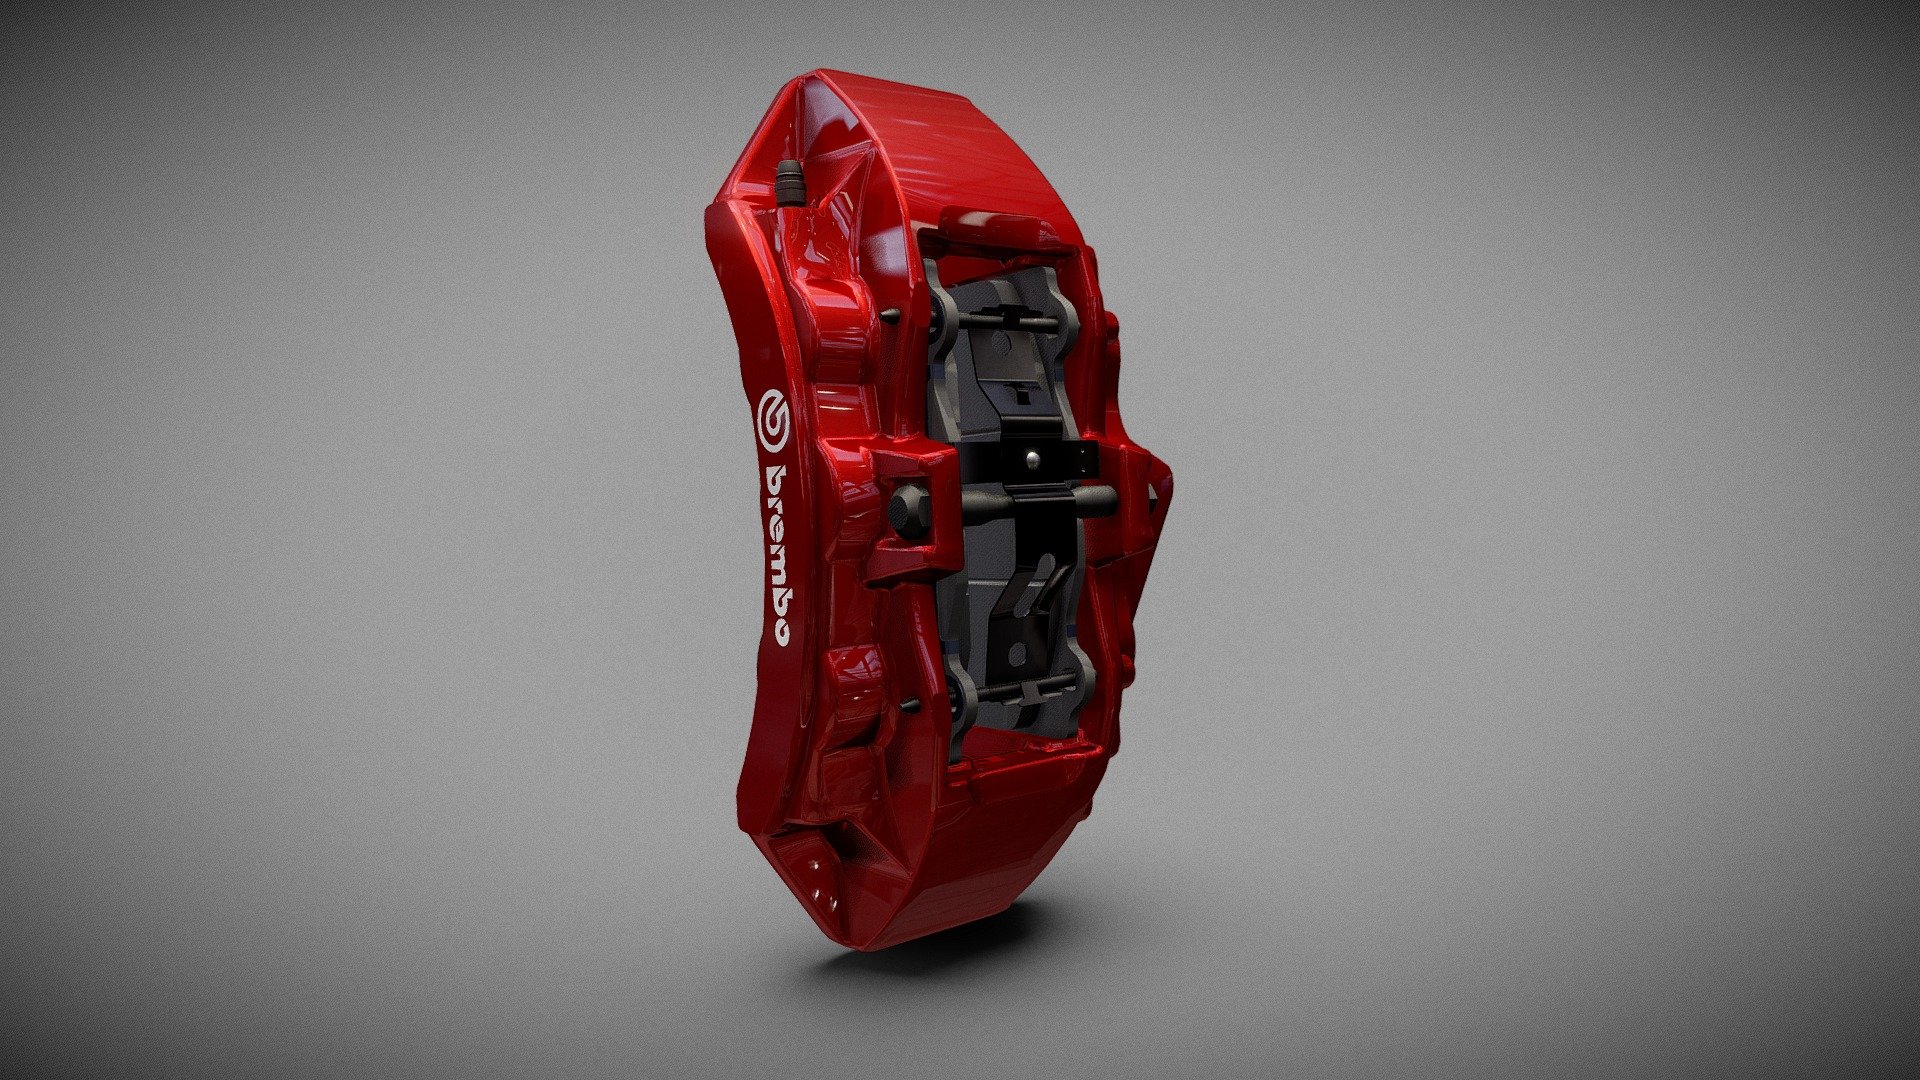 Brembo Brake Caliper (MidPoly)

Made in Lightwave 3d 2015, mid poly with no uvmaps.

Brembo Caliper for high performance car wheel 3d model